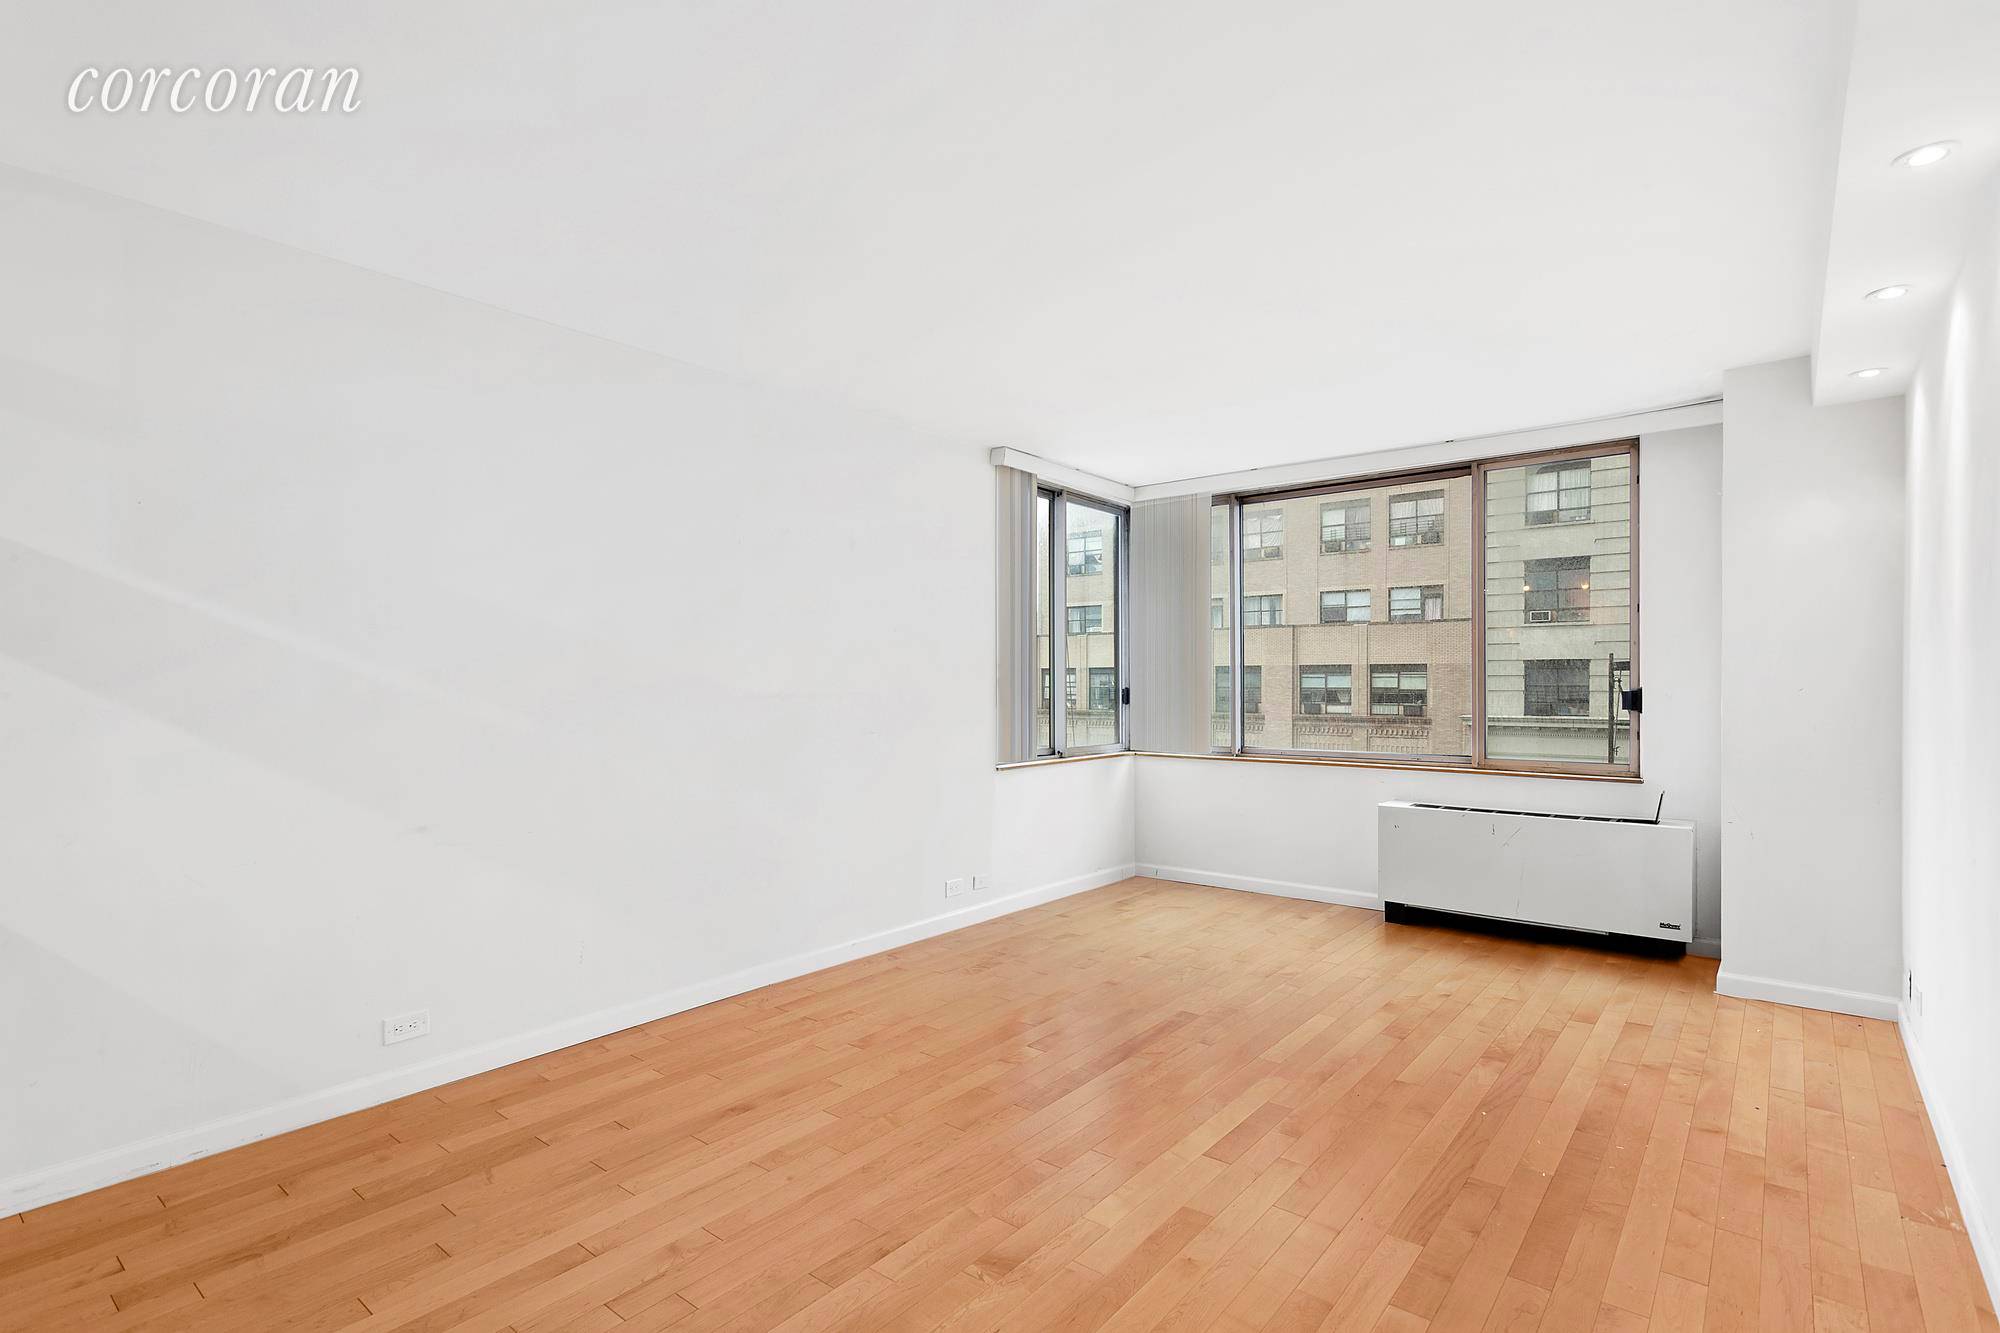 Residence 8G is a beautifully renovated, bright corner one bedroom facing North and West.